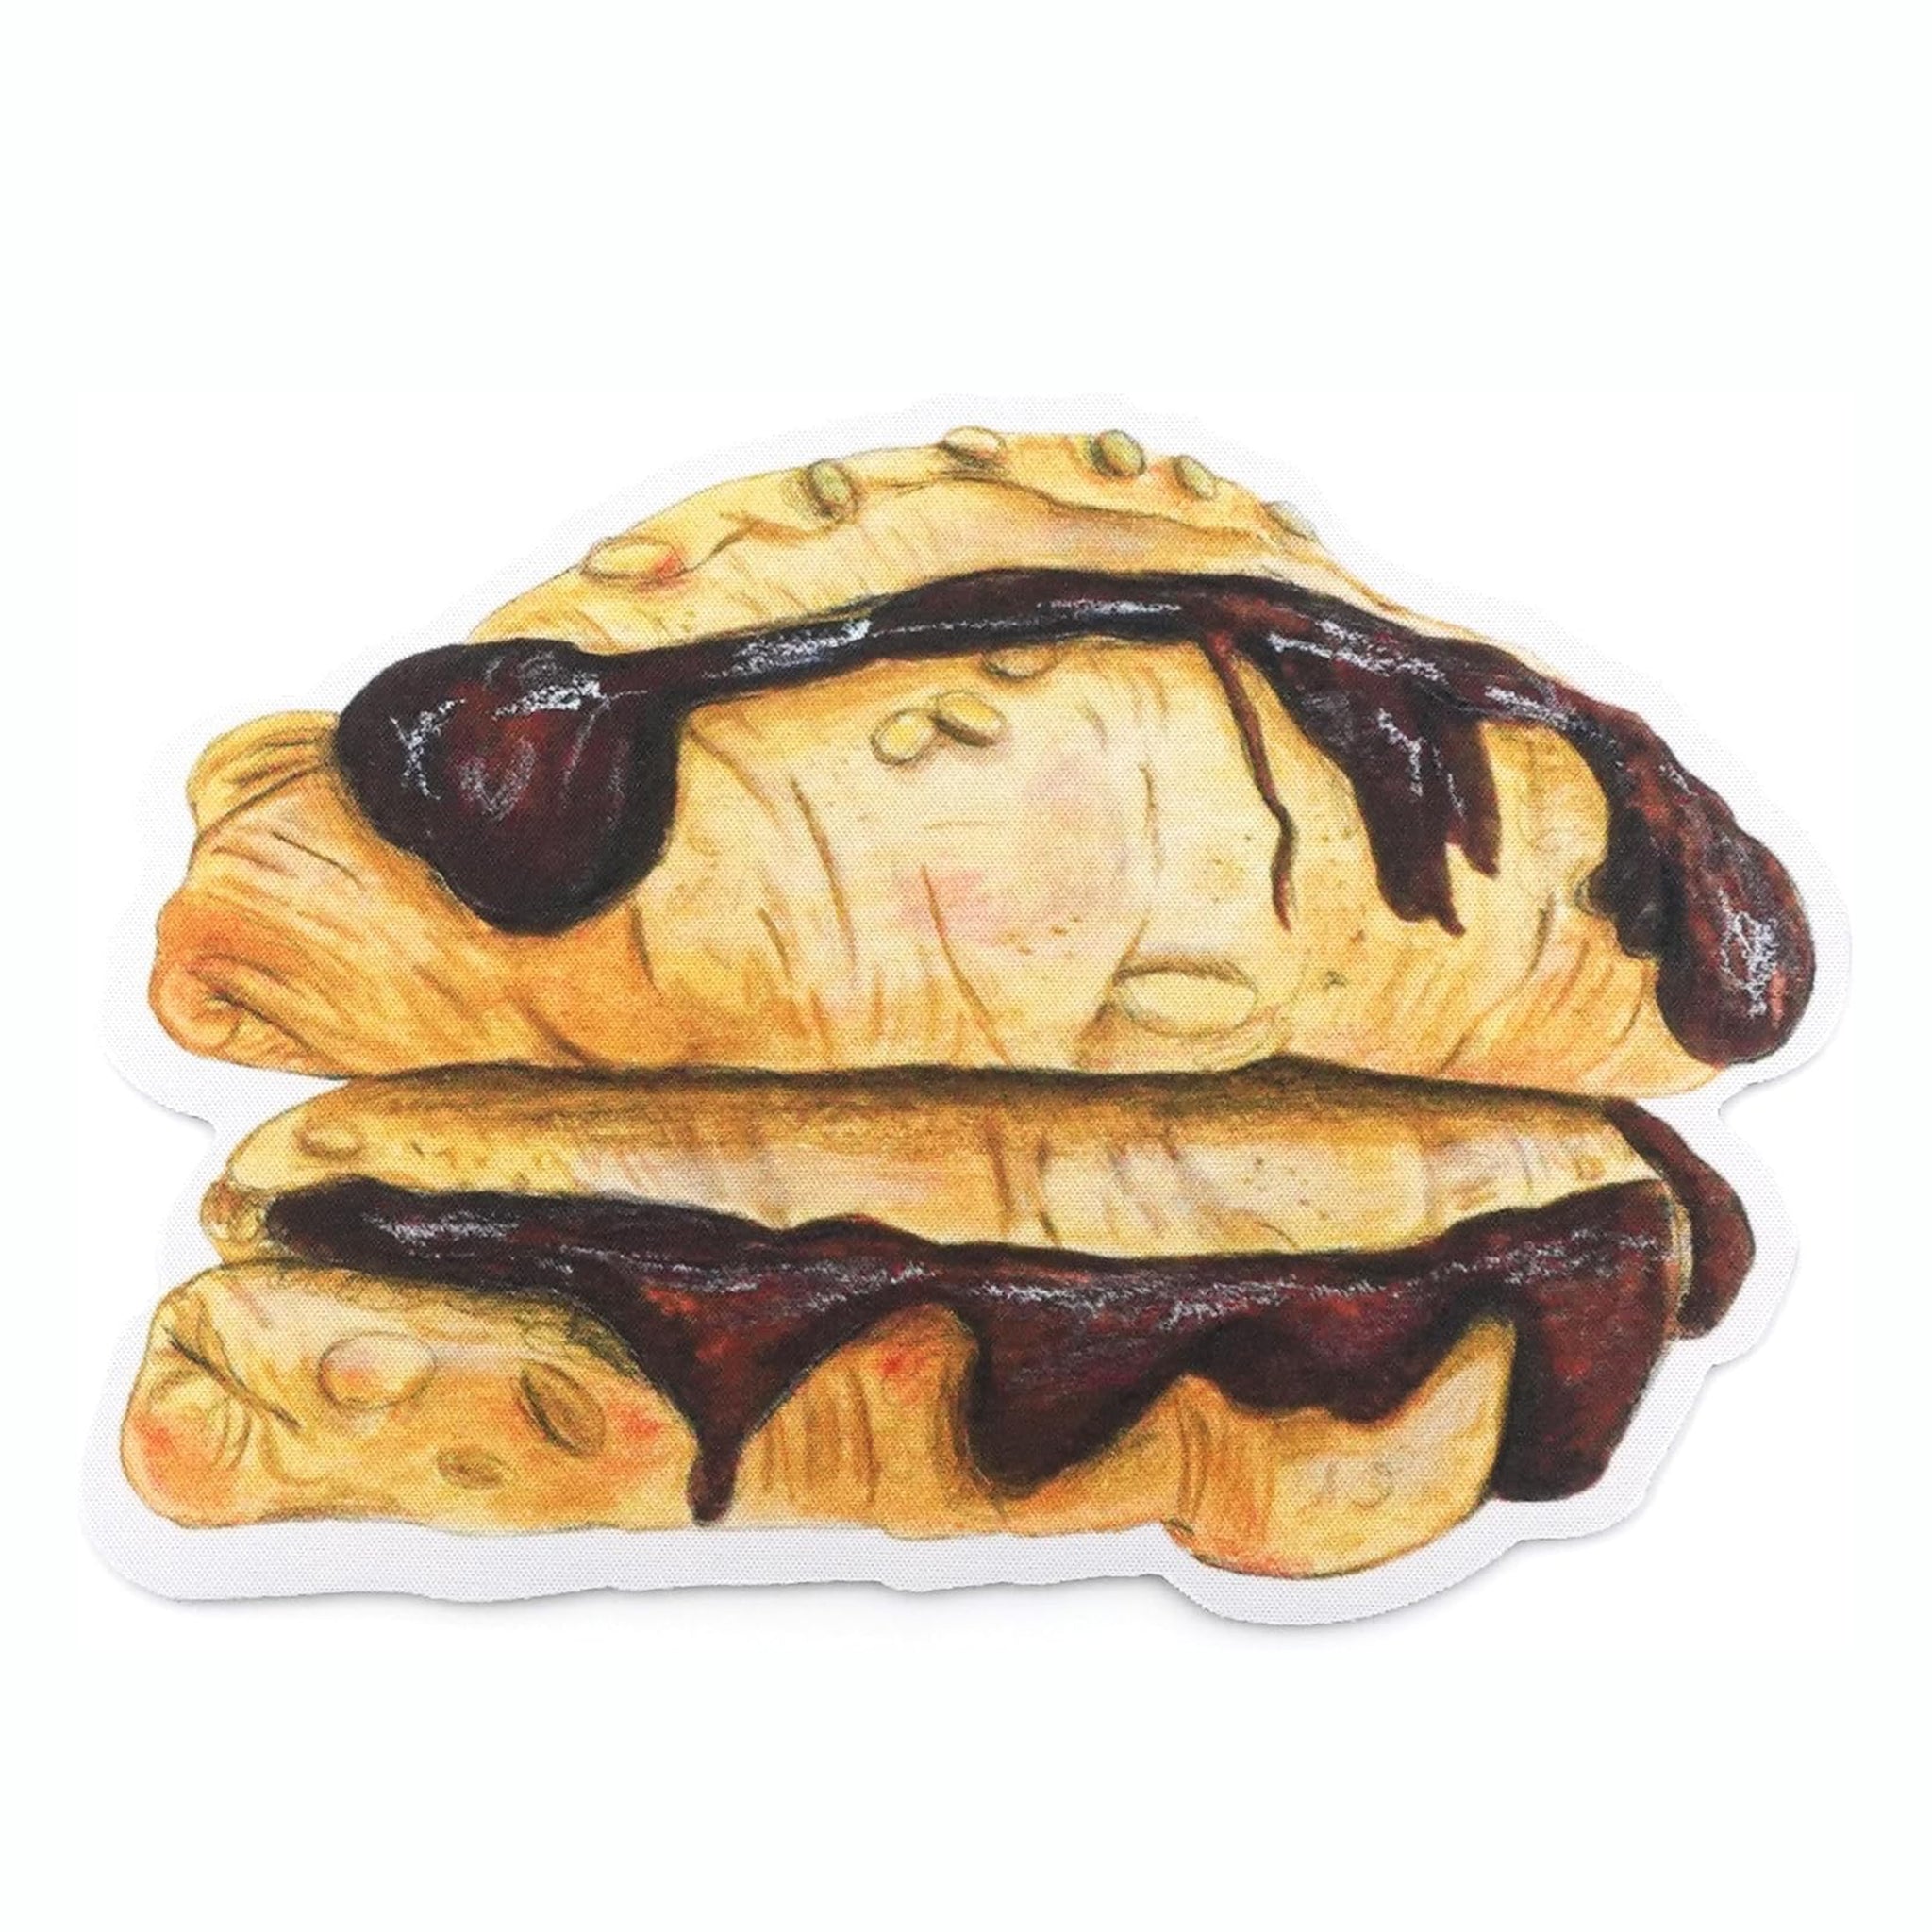 Chocolate Croissant Bread Mouse pad, Cute Funny Gift Non-Slip Rubber Mouse Mat for Desk and Laptop Computer